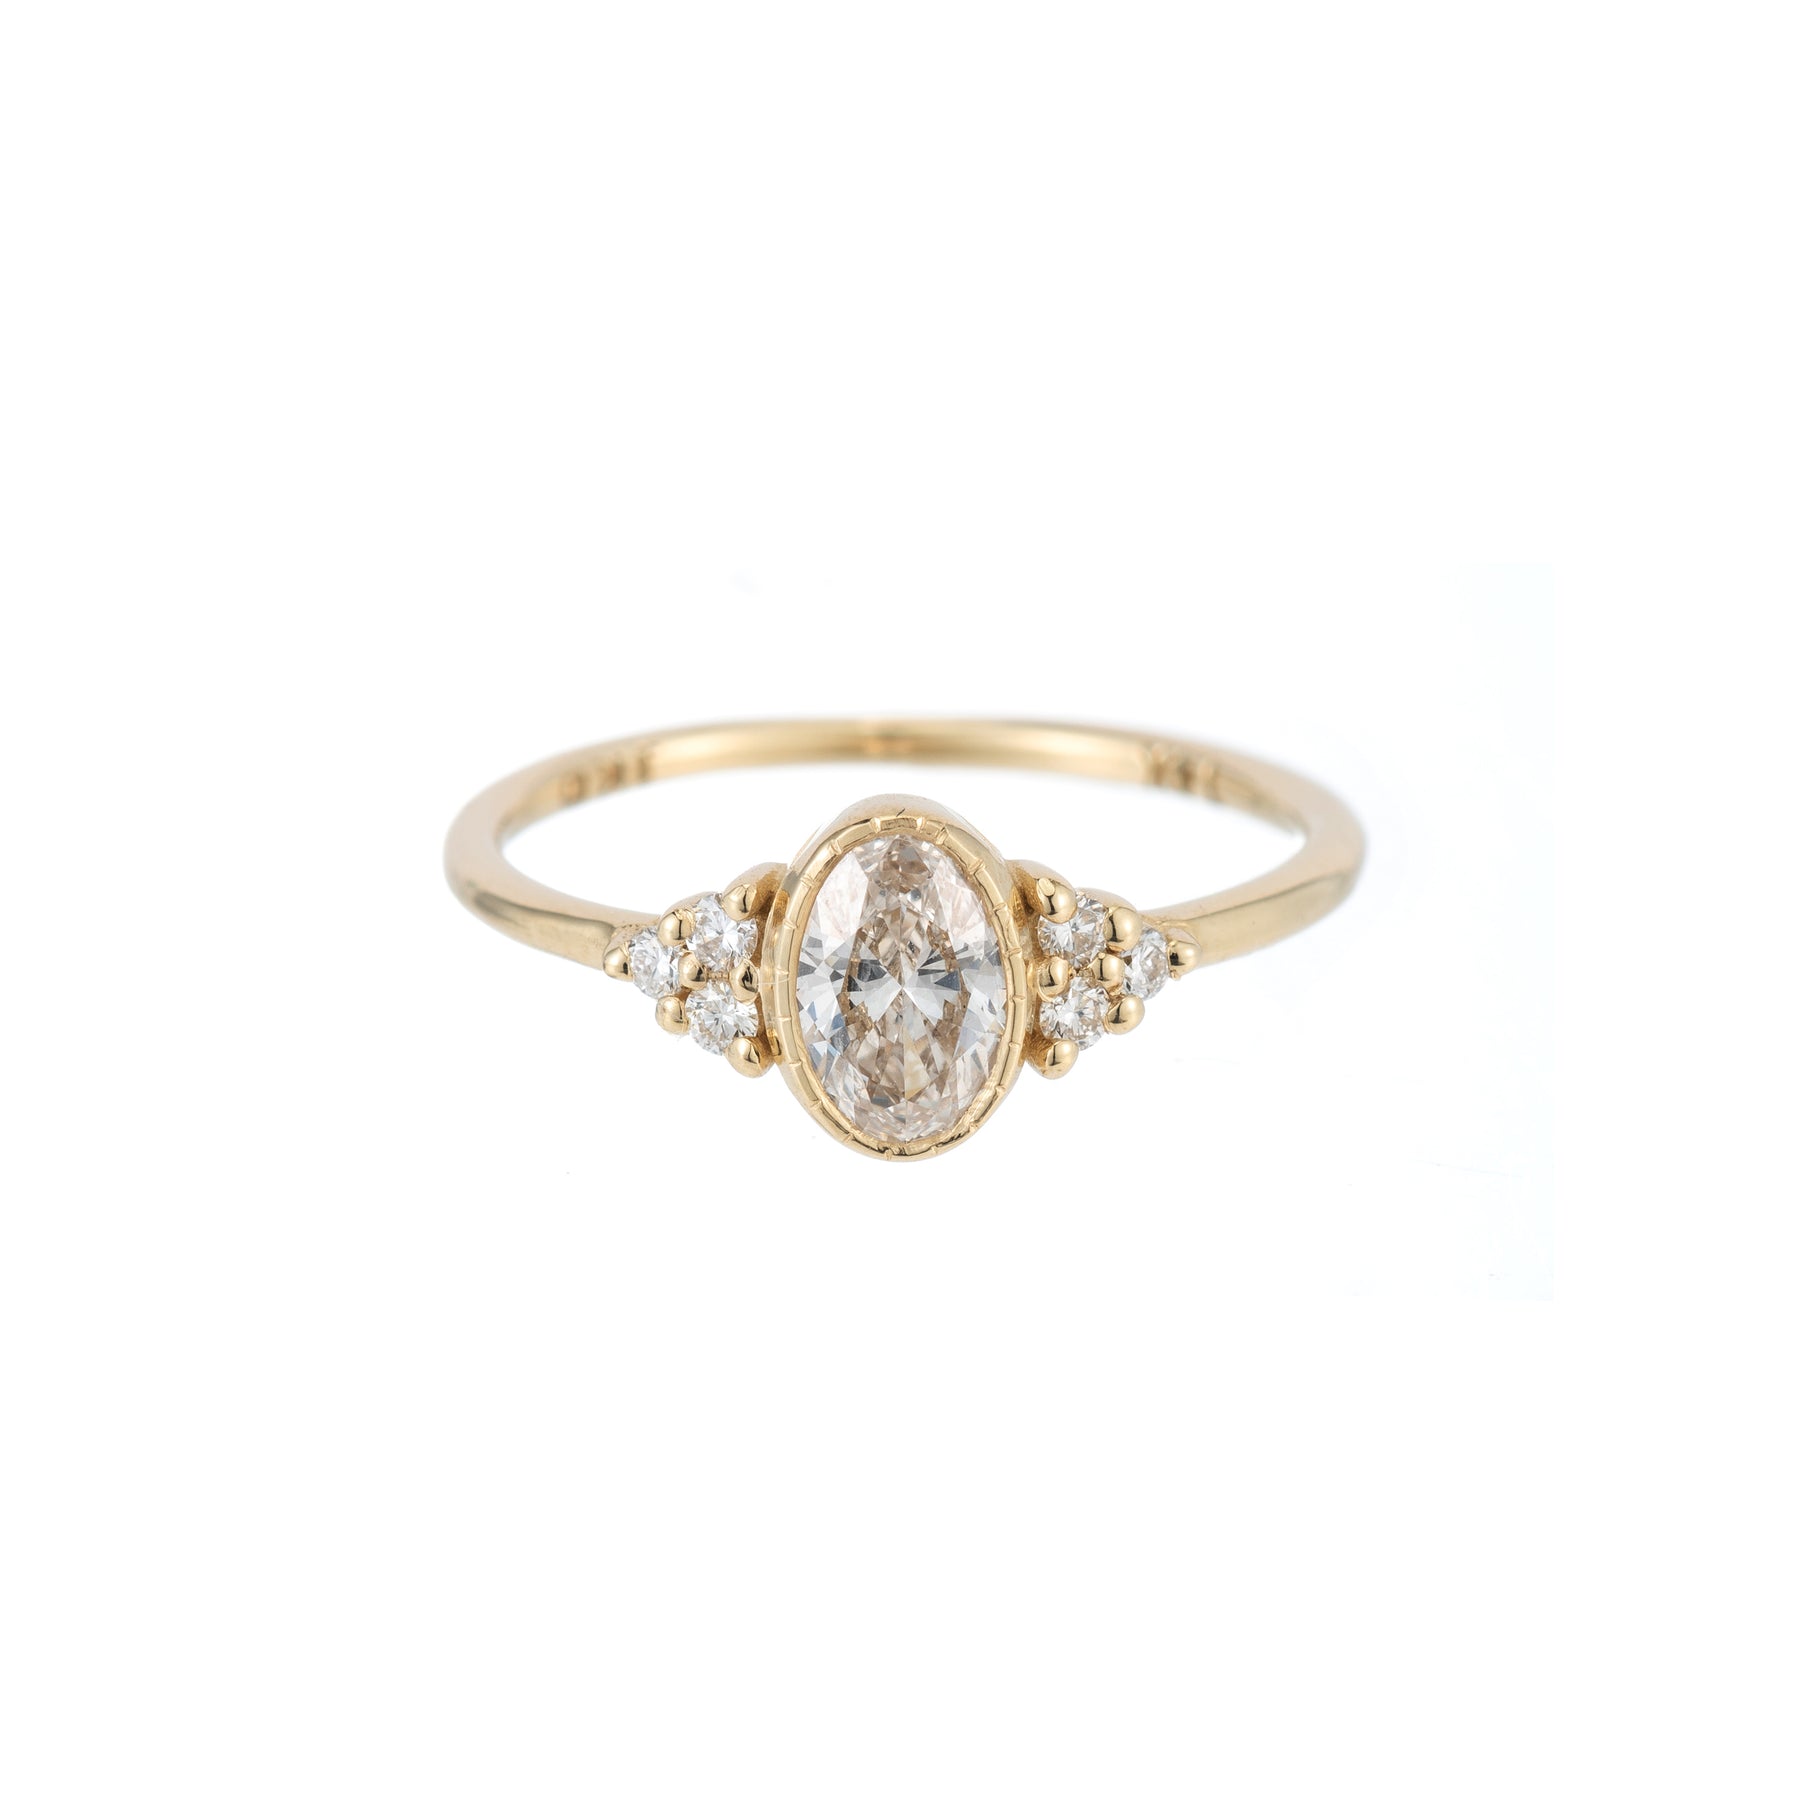 OVAL DIAMOND CLUSTER RING